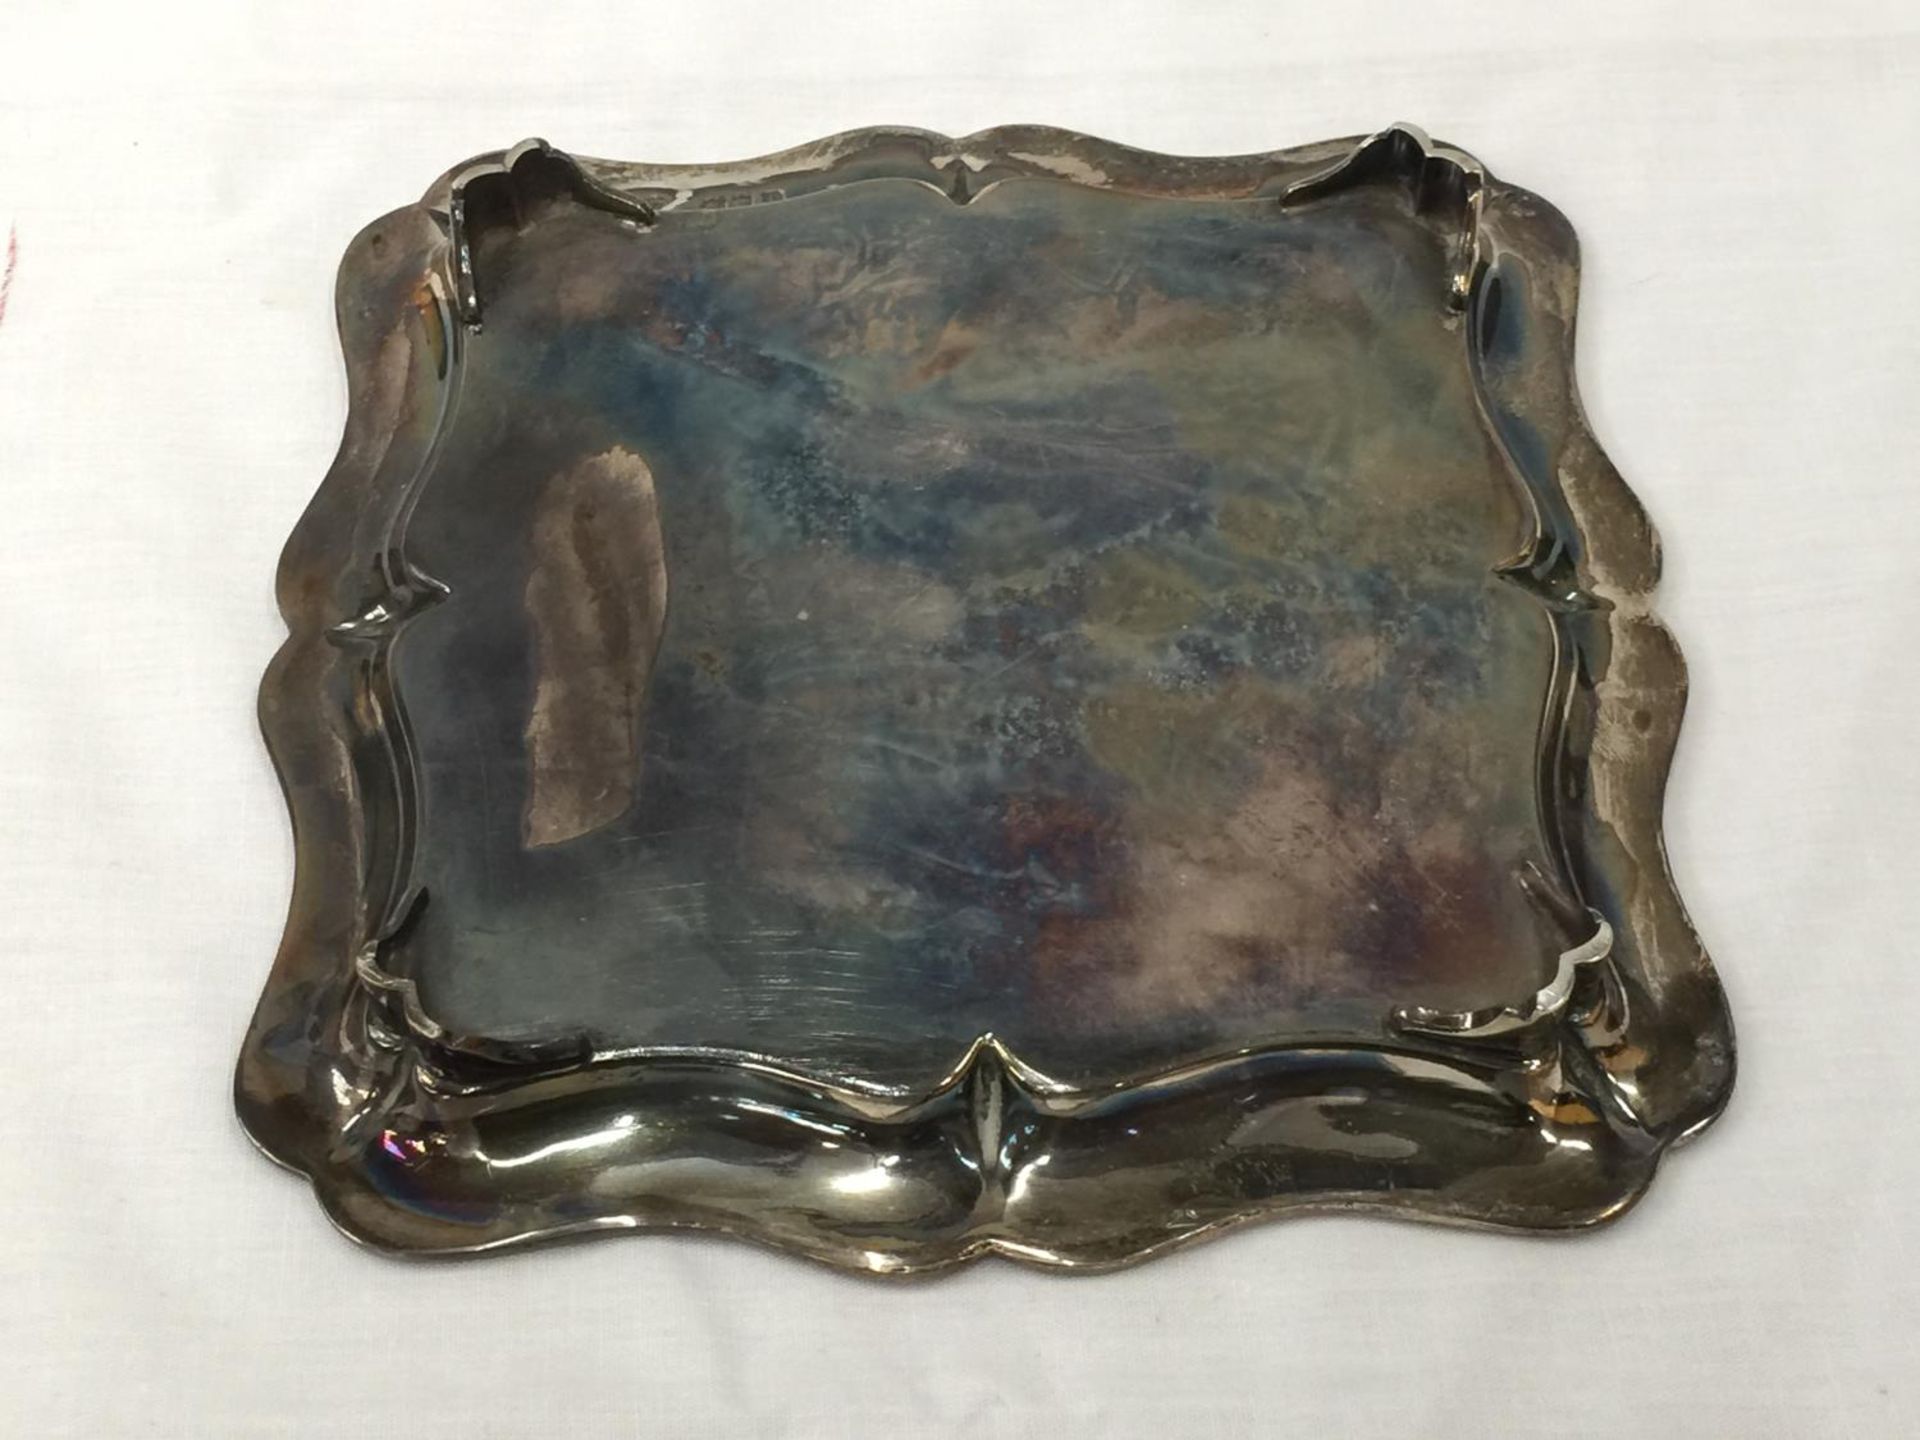 A LONDON HALLMARKED SILVER TRAY ON FEET. 18CM X 18CM. WEIGHT 295 GRAMS - Image 10 of 10